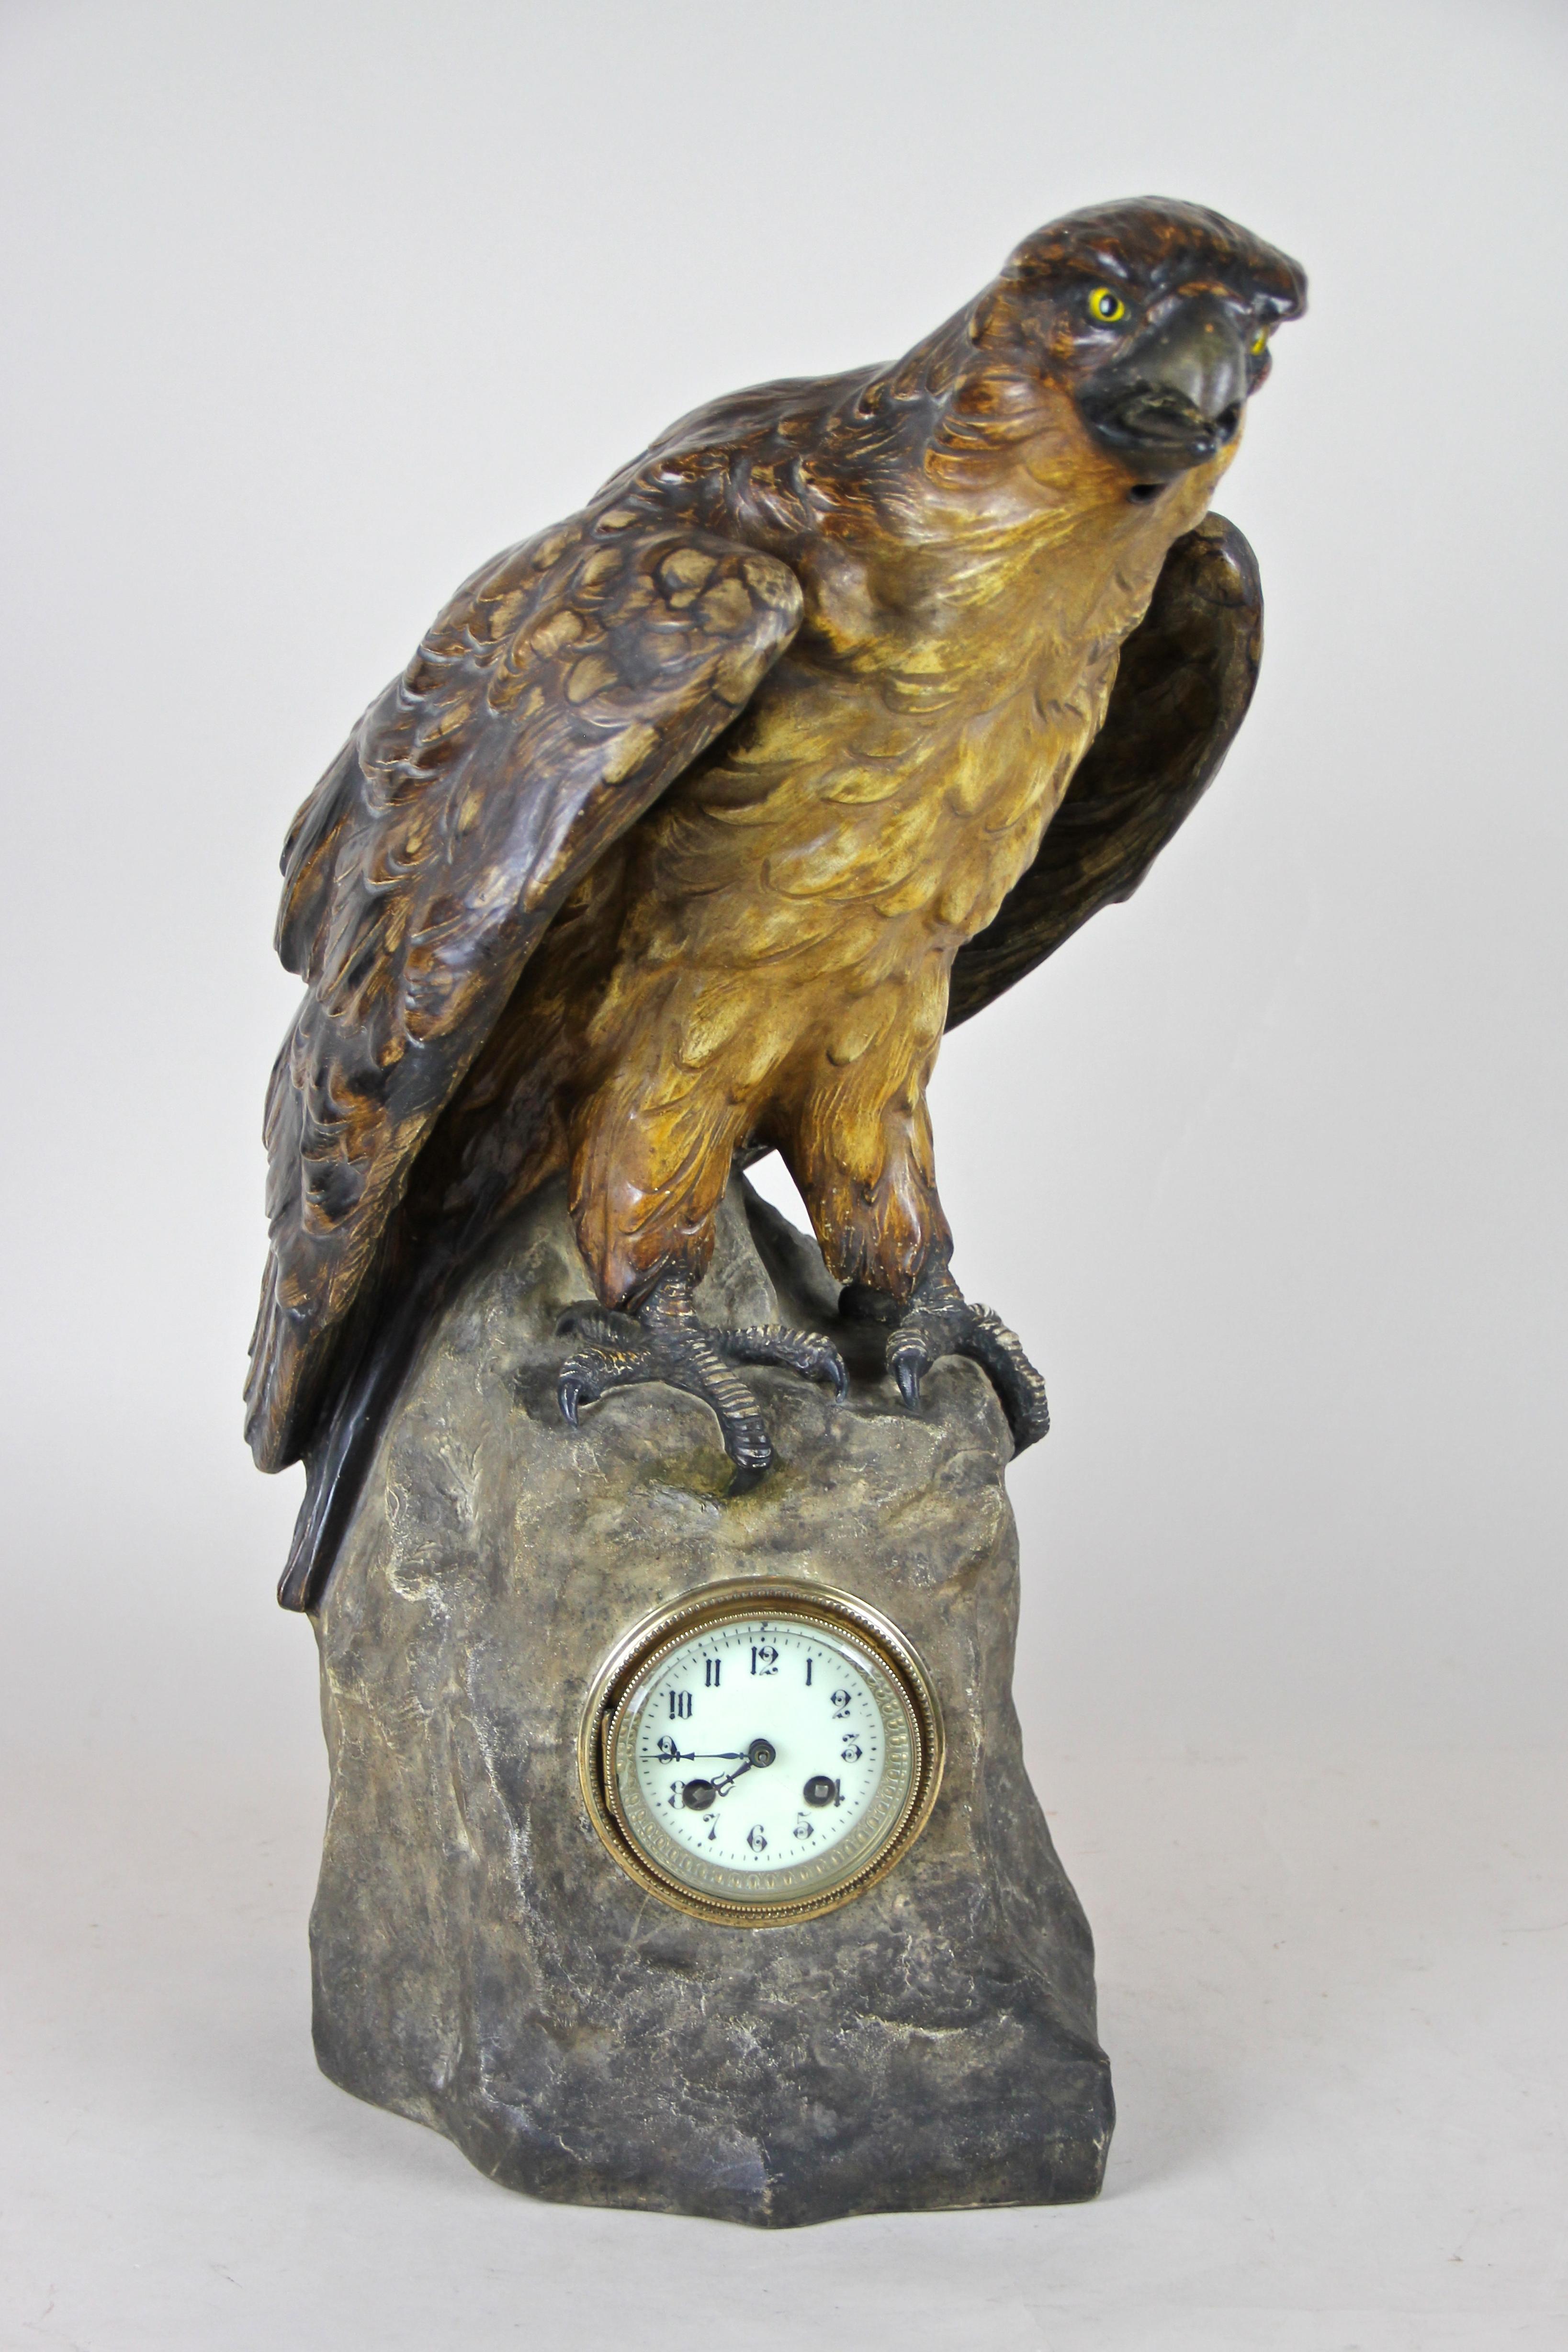 Really rare, large Majolica table clock by Johann Maresch out of Bohemia from the period around 1900, signed by famous artist August Otto. This imposing sculptural table clock depicts an excellent worked eagle sitting on a rock which houses a round